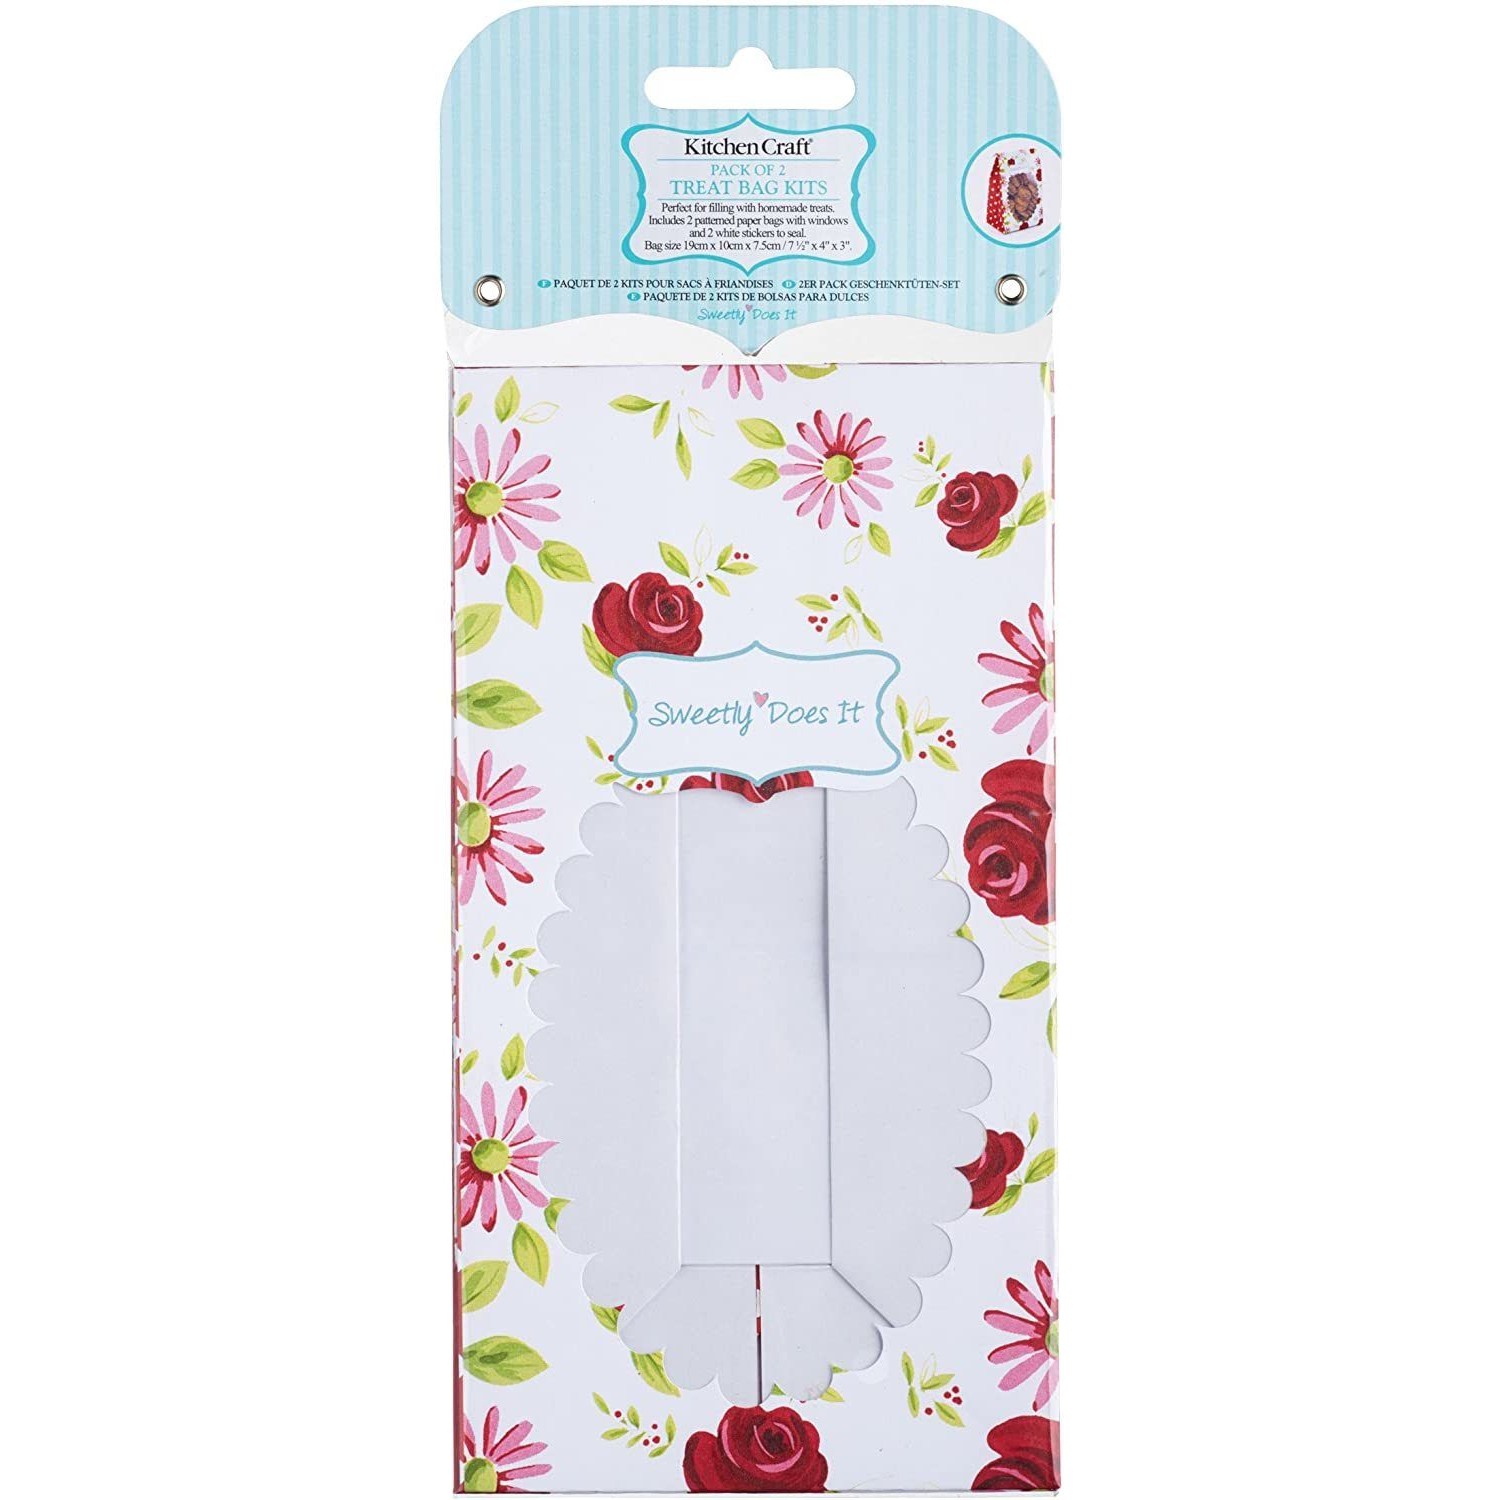 KitchenCraft Sweetly Does It Pack of 2 Treat Bag Kits RRP £1.89 CLEARANCE XL £1